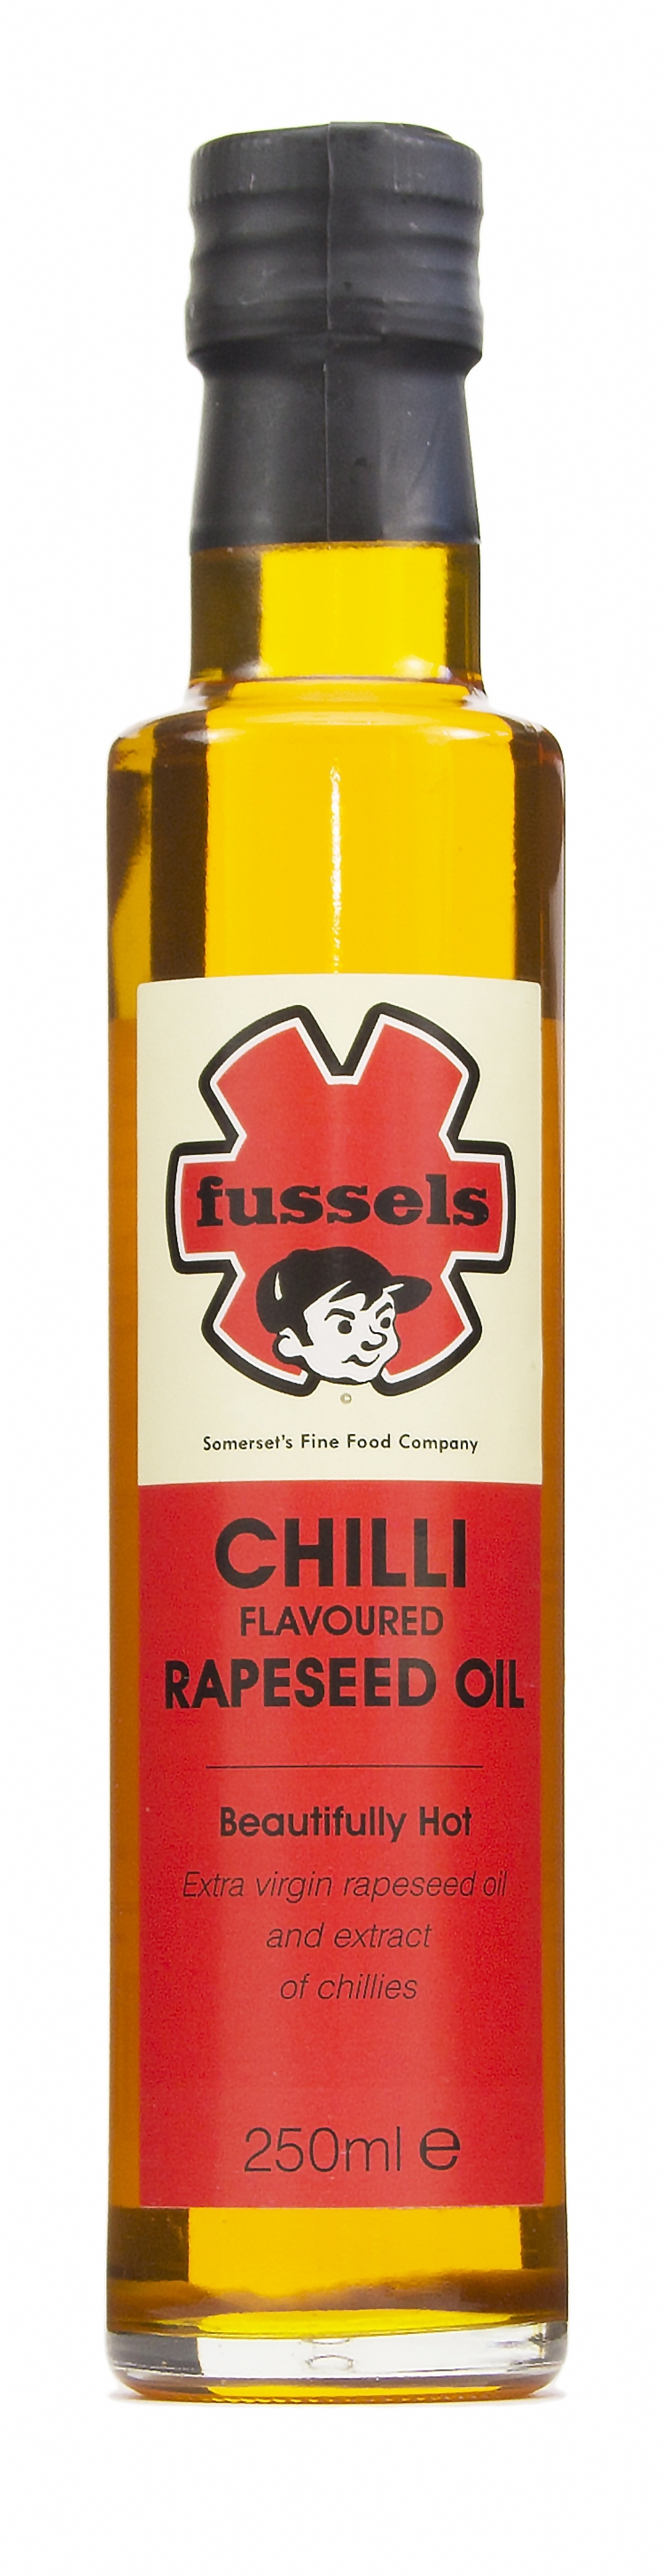 FUSSELS Chilli Flavoured Rapeseed Oil 250ml